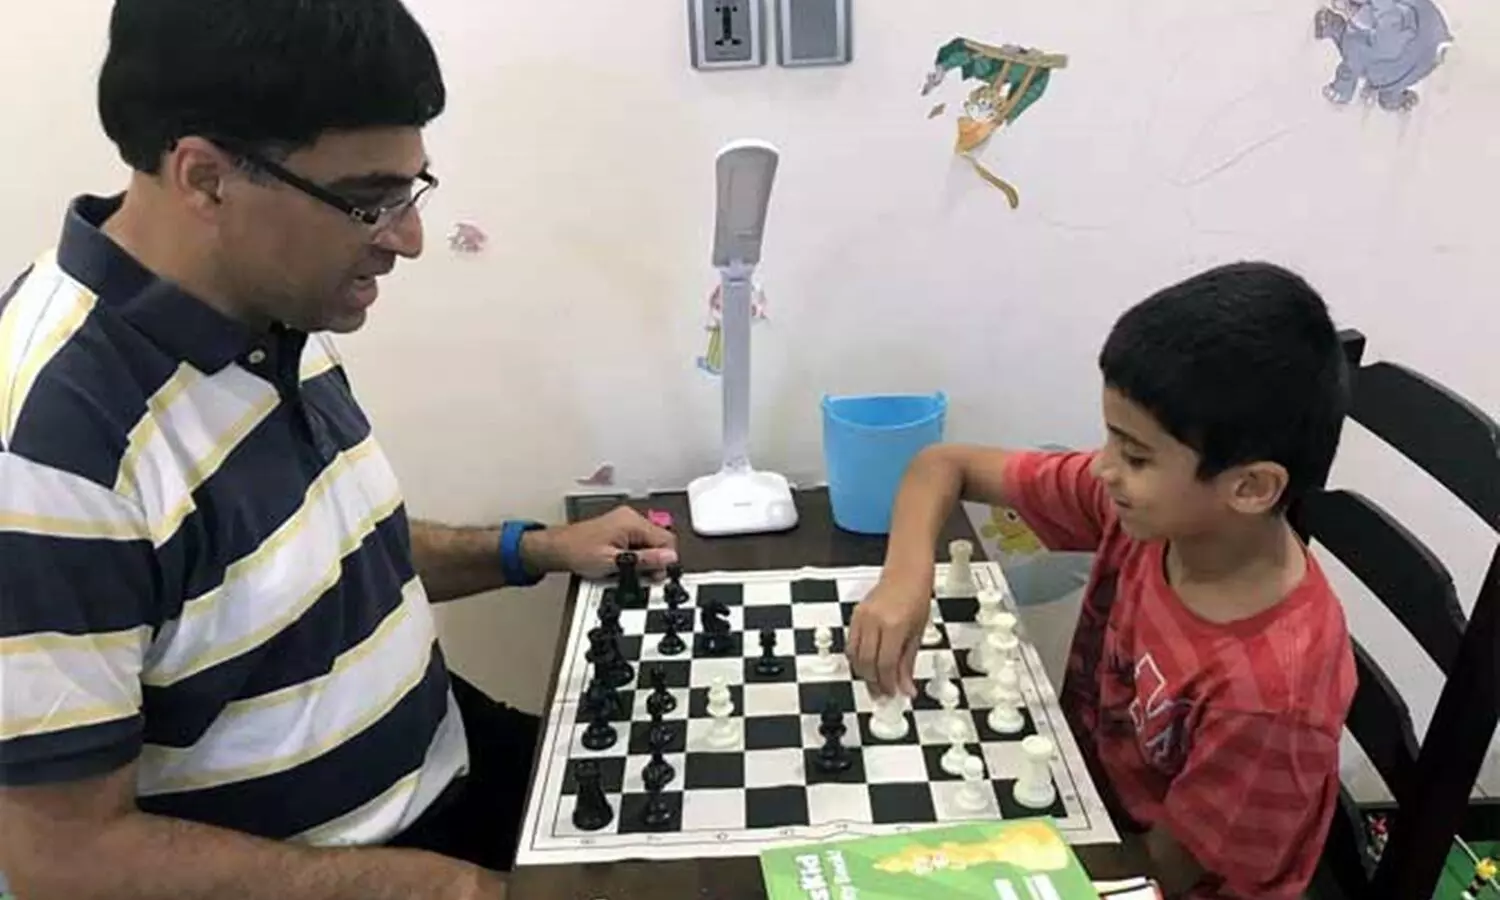 Viswanathan Anand's son gives him a surprise gift which lands up